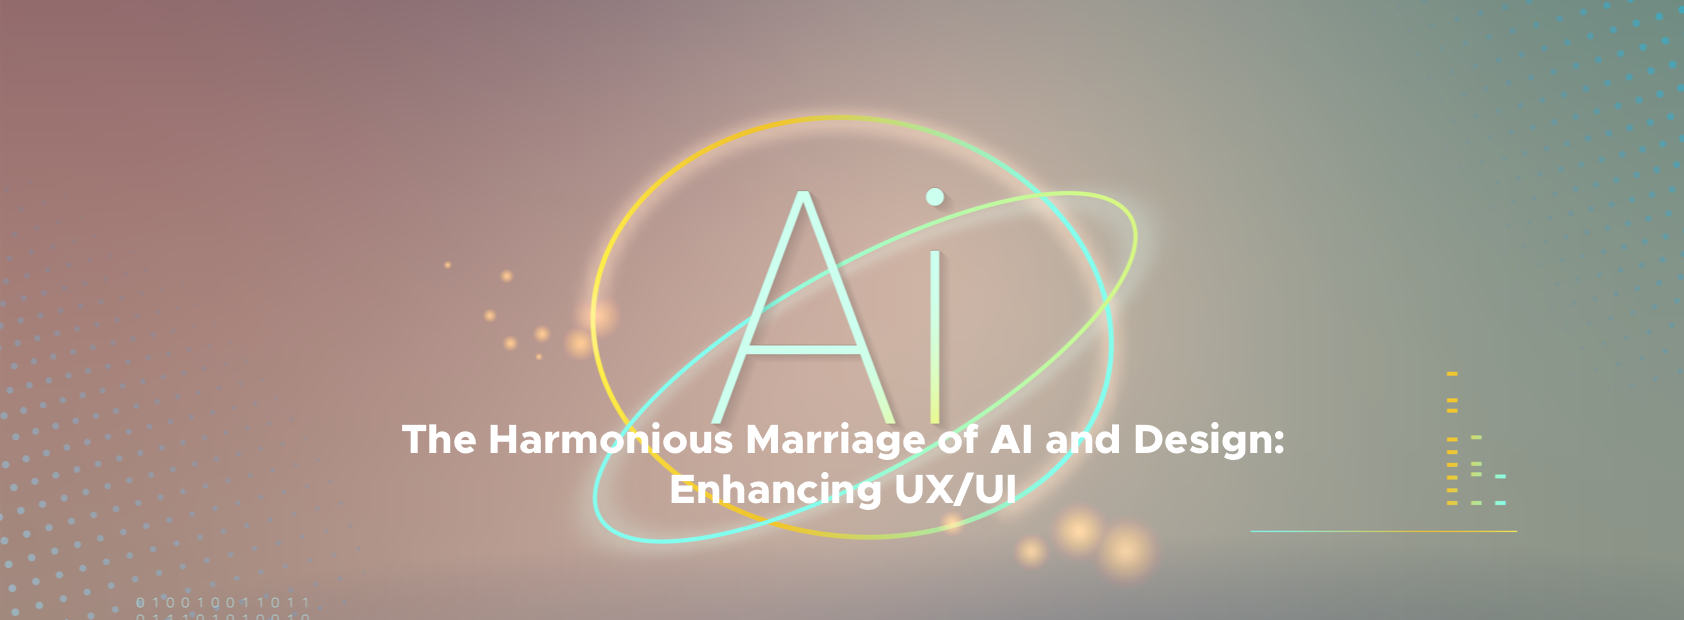 The Harmonious Marriage of AI and Design: Enhancing UX/UI / Blogs / Perficient